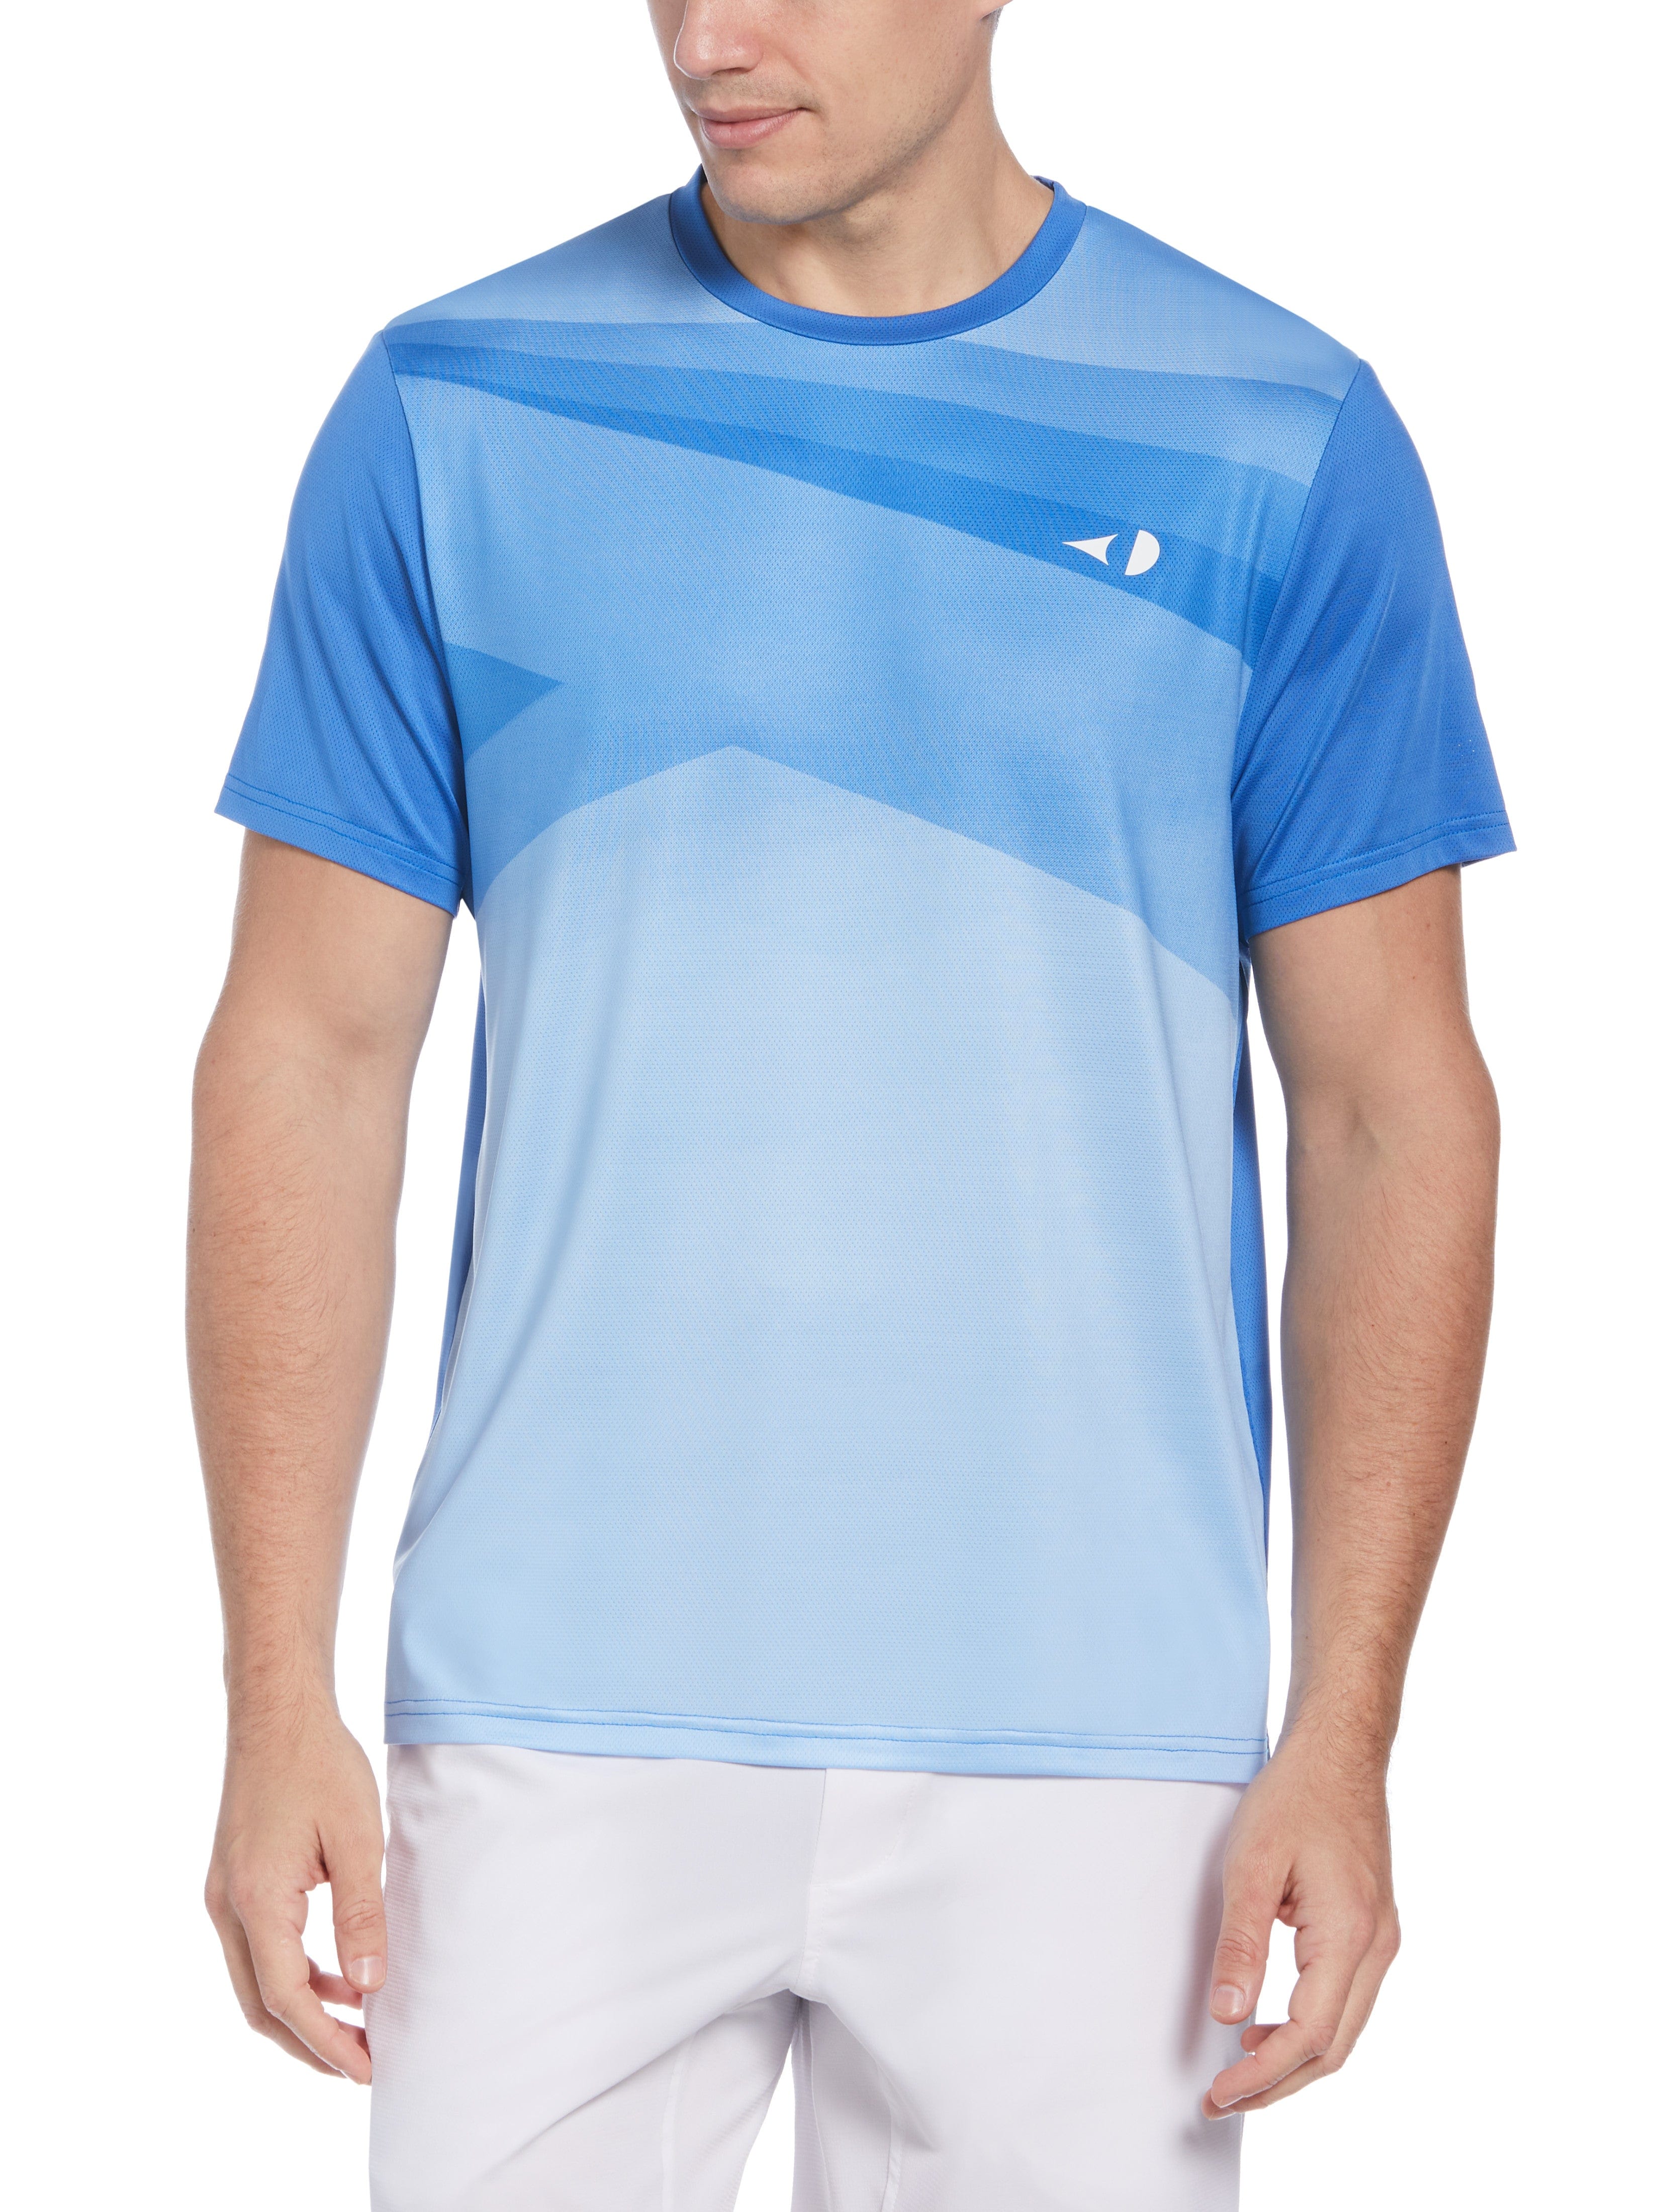 Grand Slam Mens Asymetrical Texture Printed Tennis T-Shirt, Size Small, Egyptian Blue, Polyester/Spandex | Golf Apparel Shop